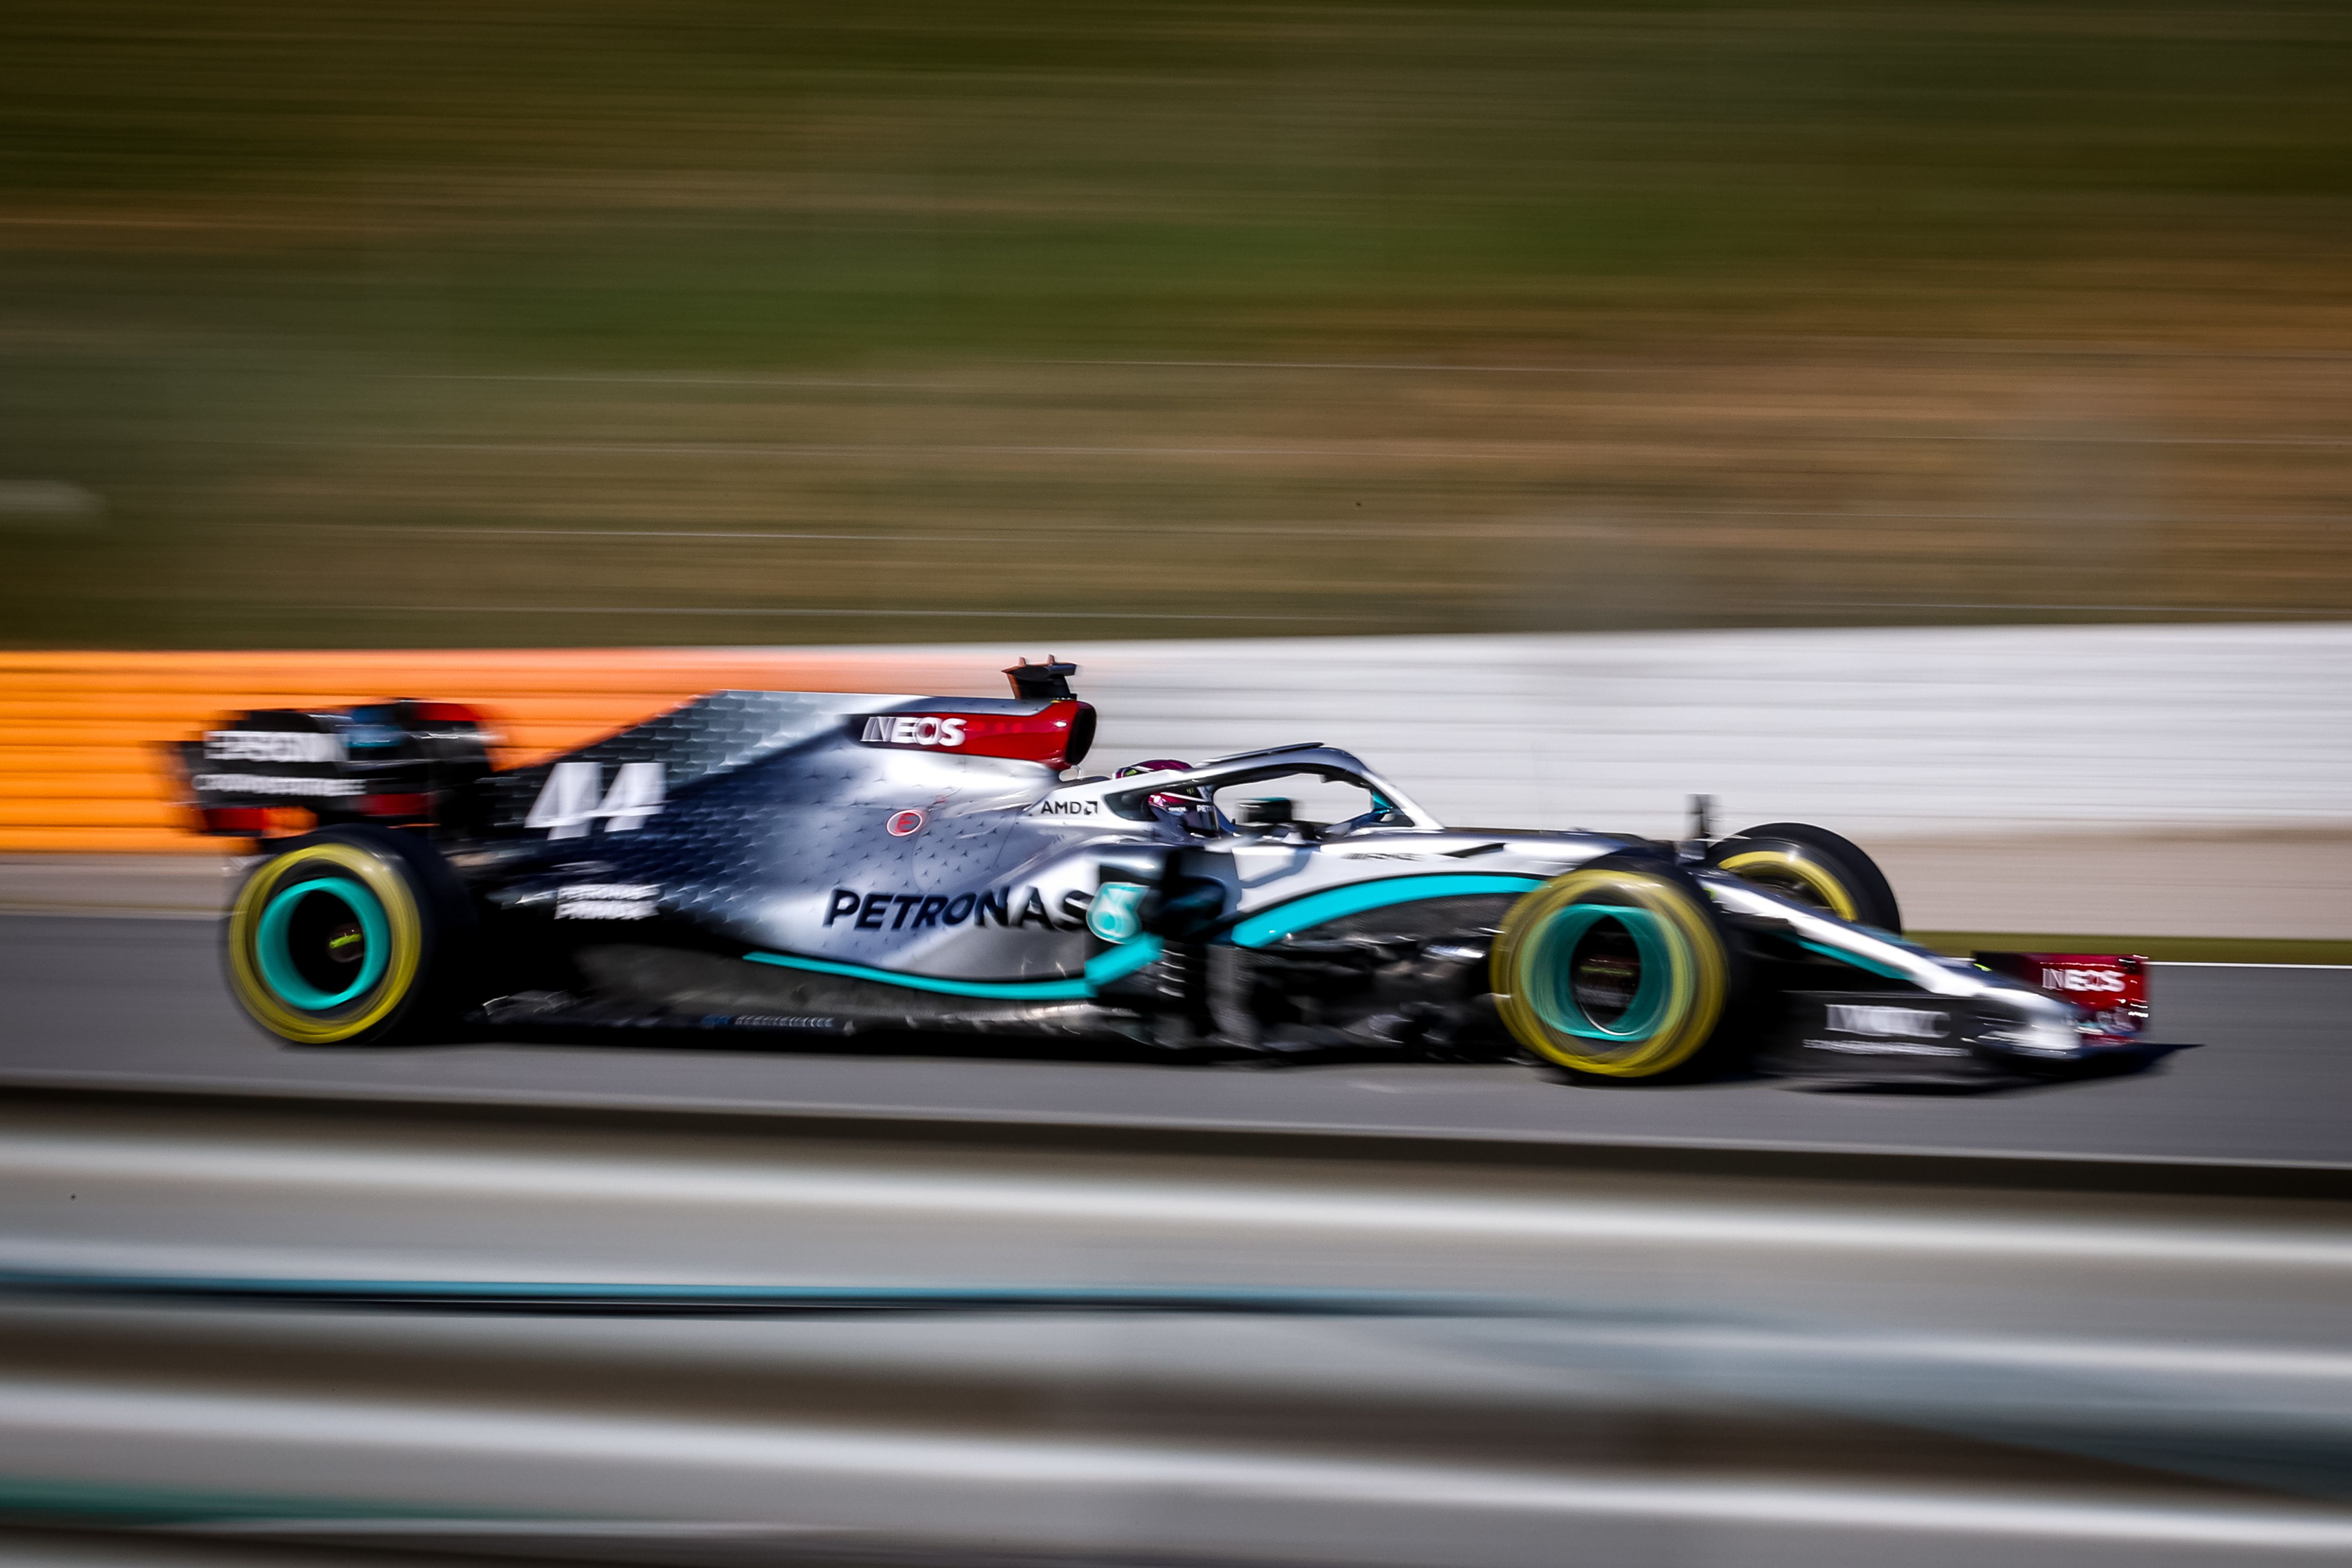 All The Ways Mercedes Made Its 2020 Formula 1 Car Even Better